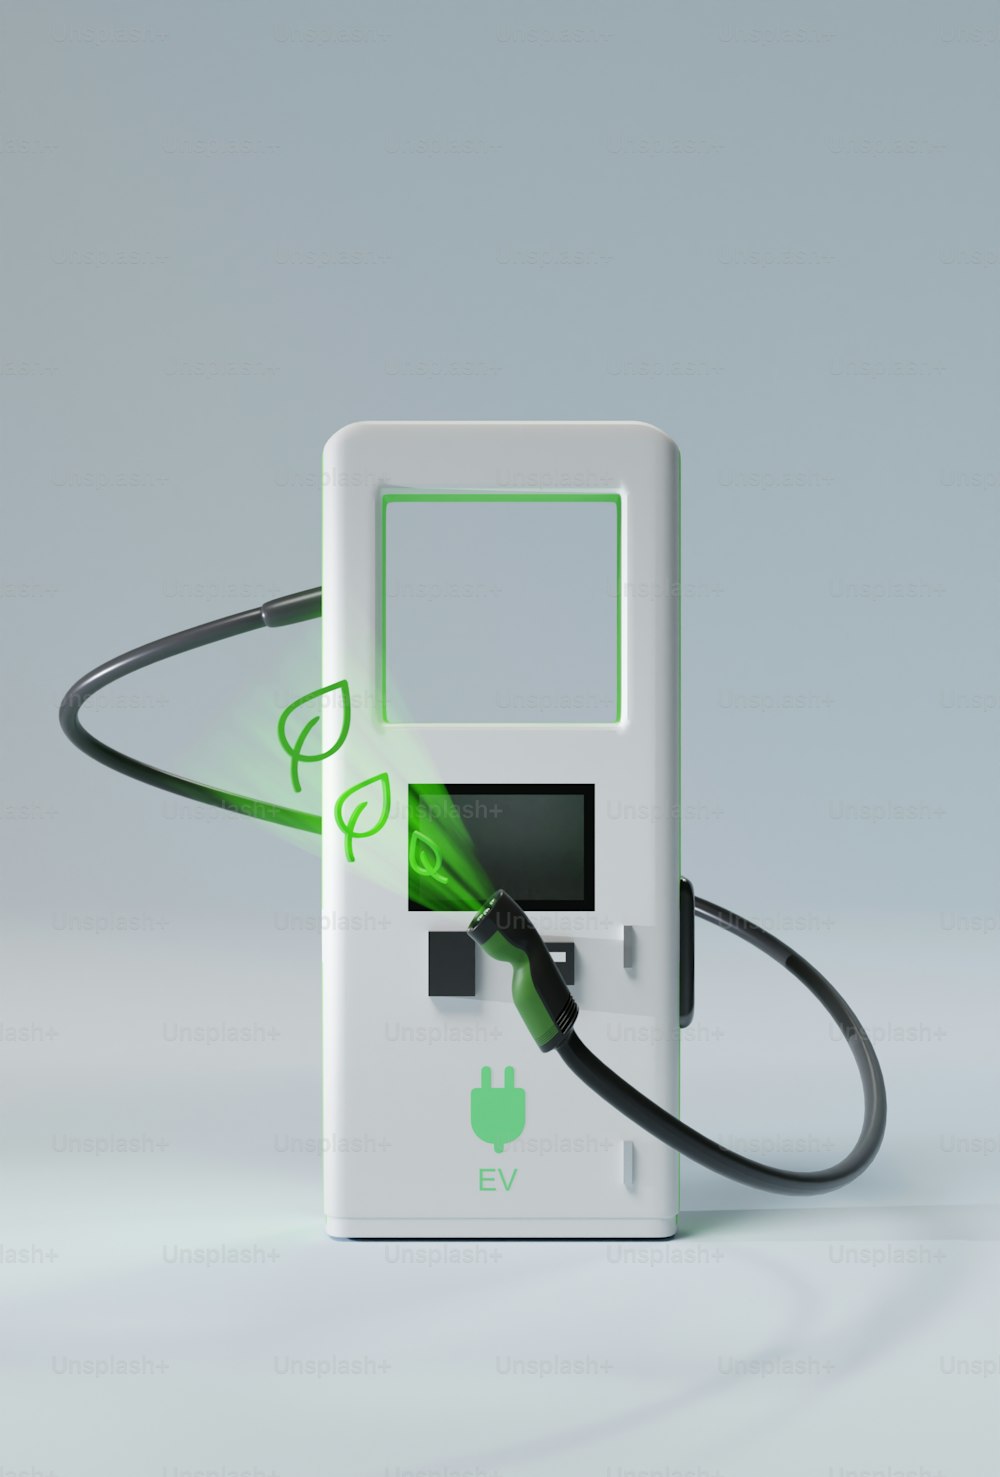 an electronic device with a green light coming out of it